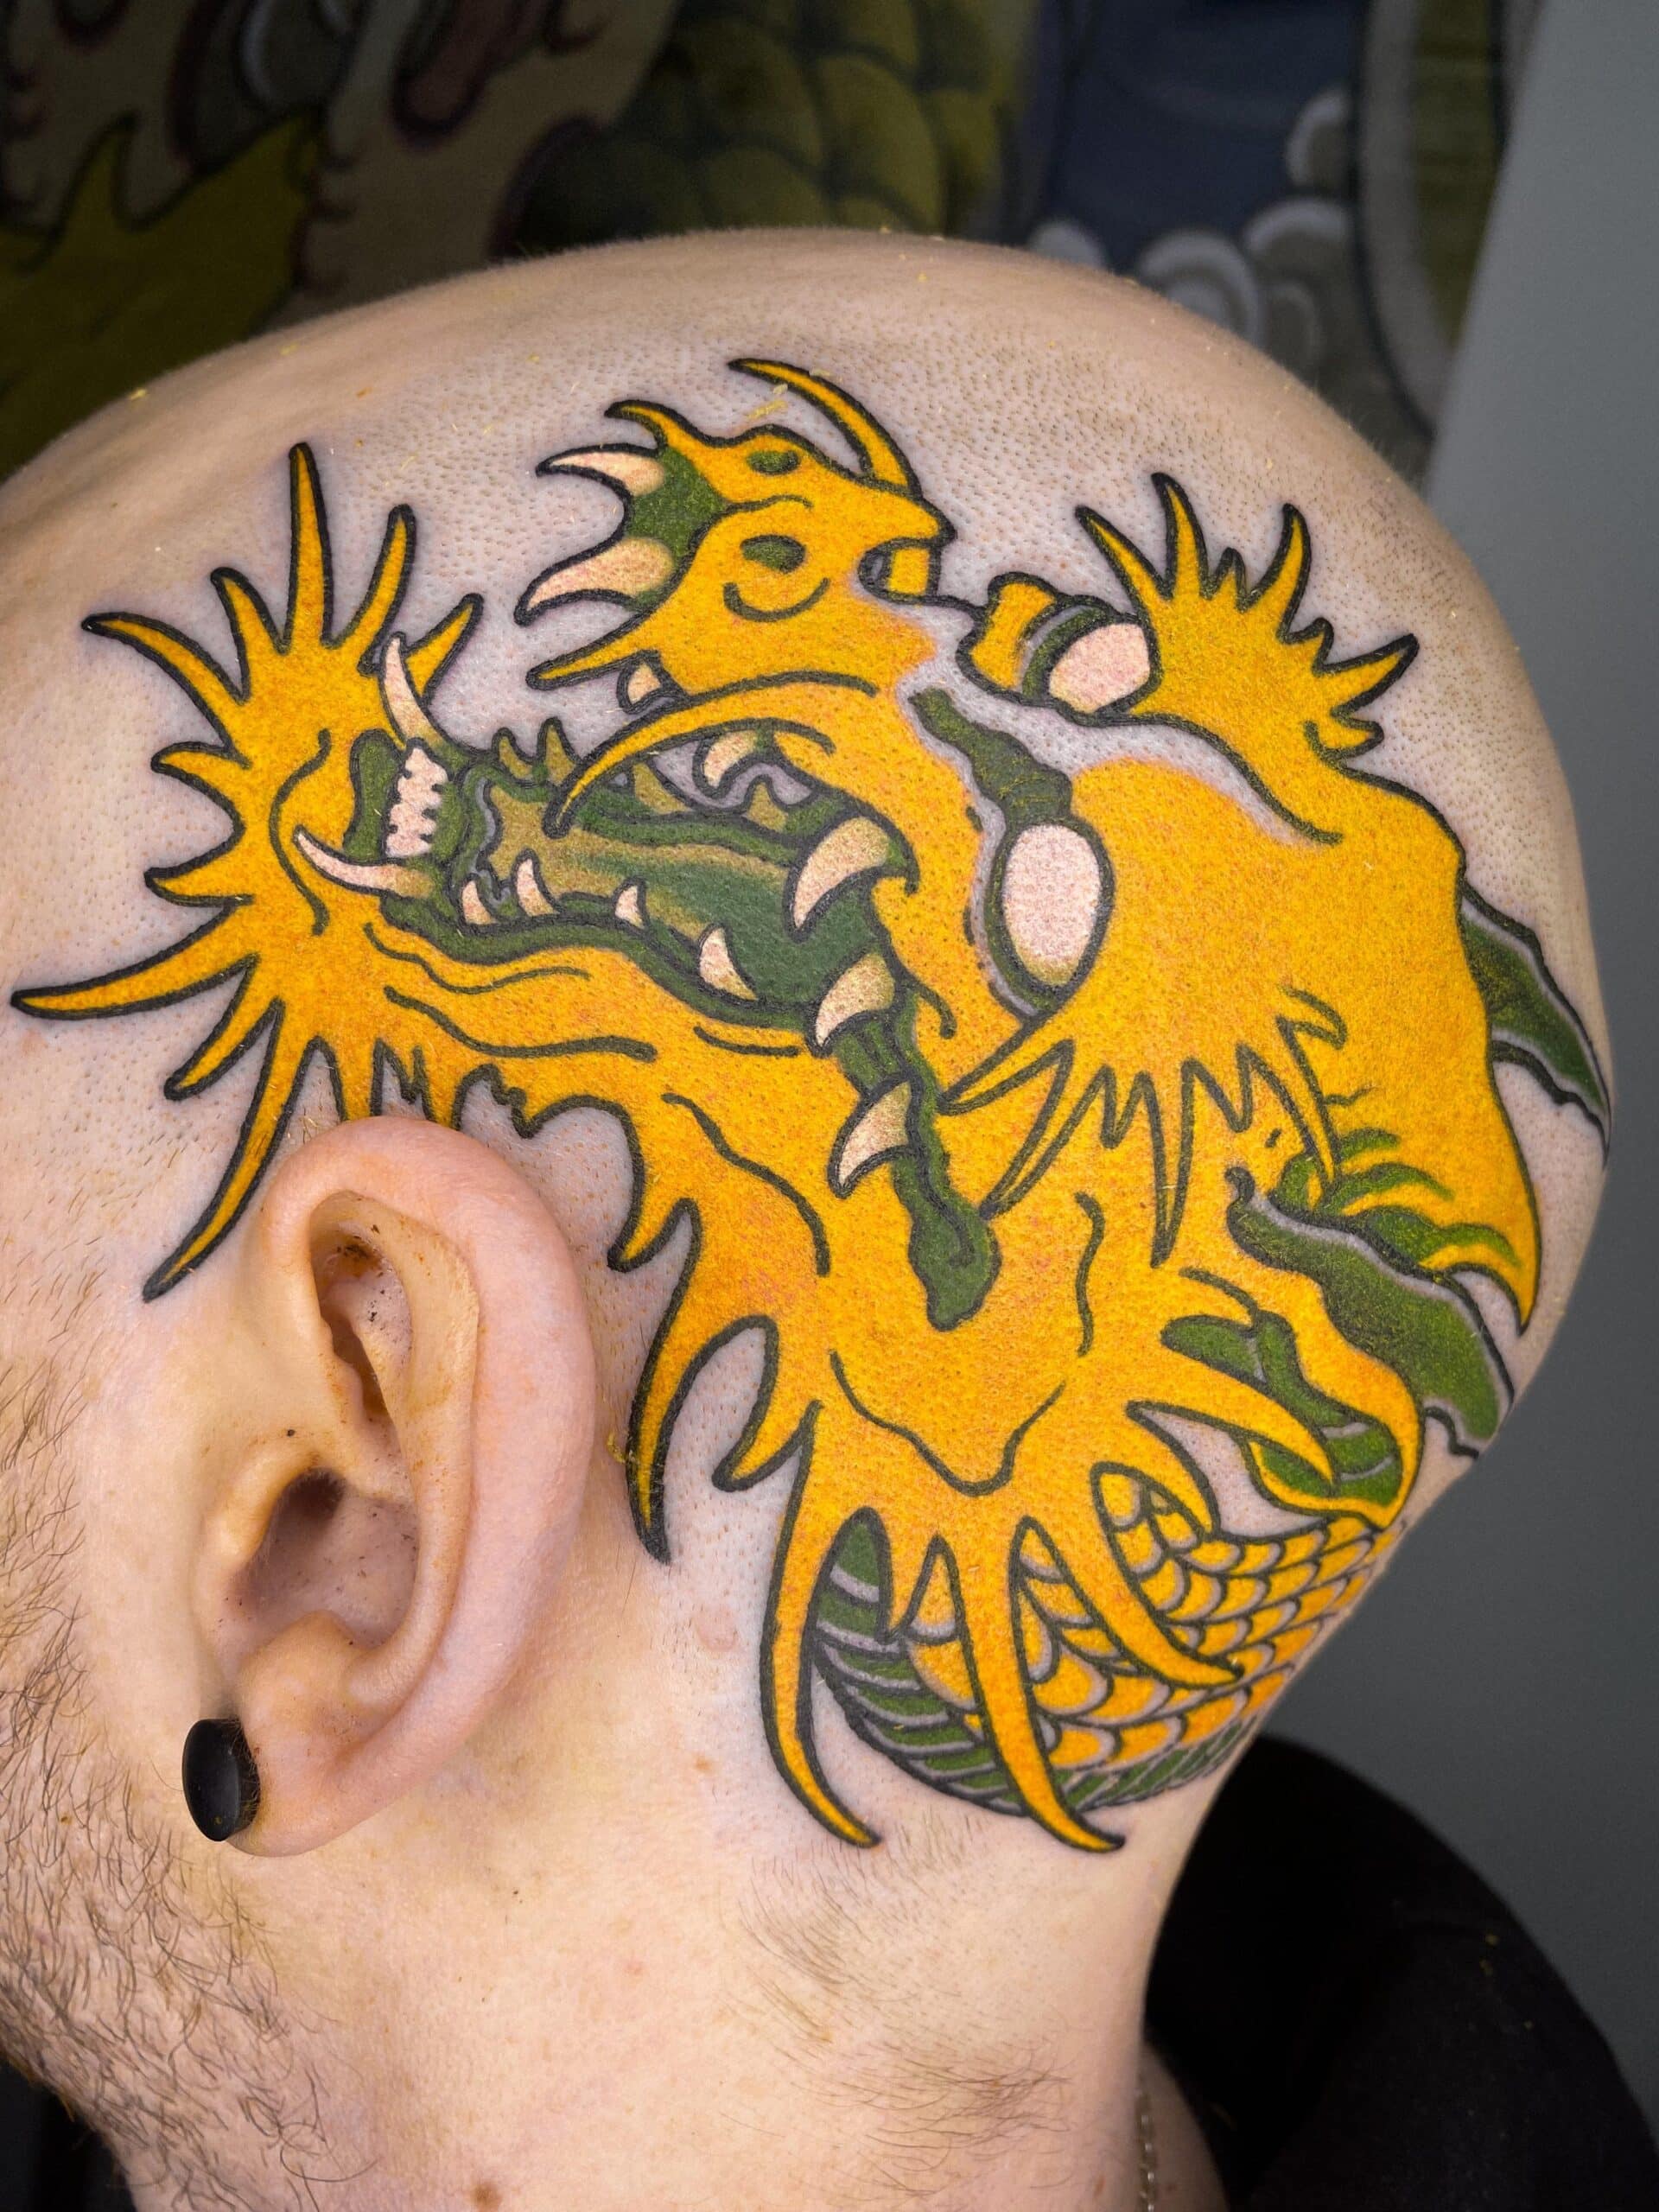 The Head with Yellow Dragon Tattoo